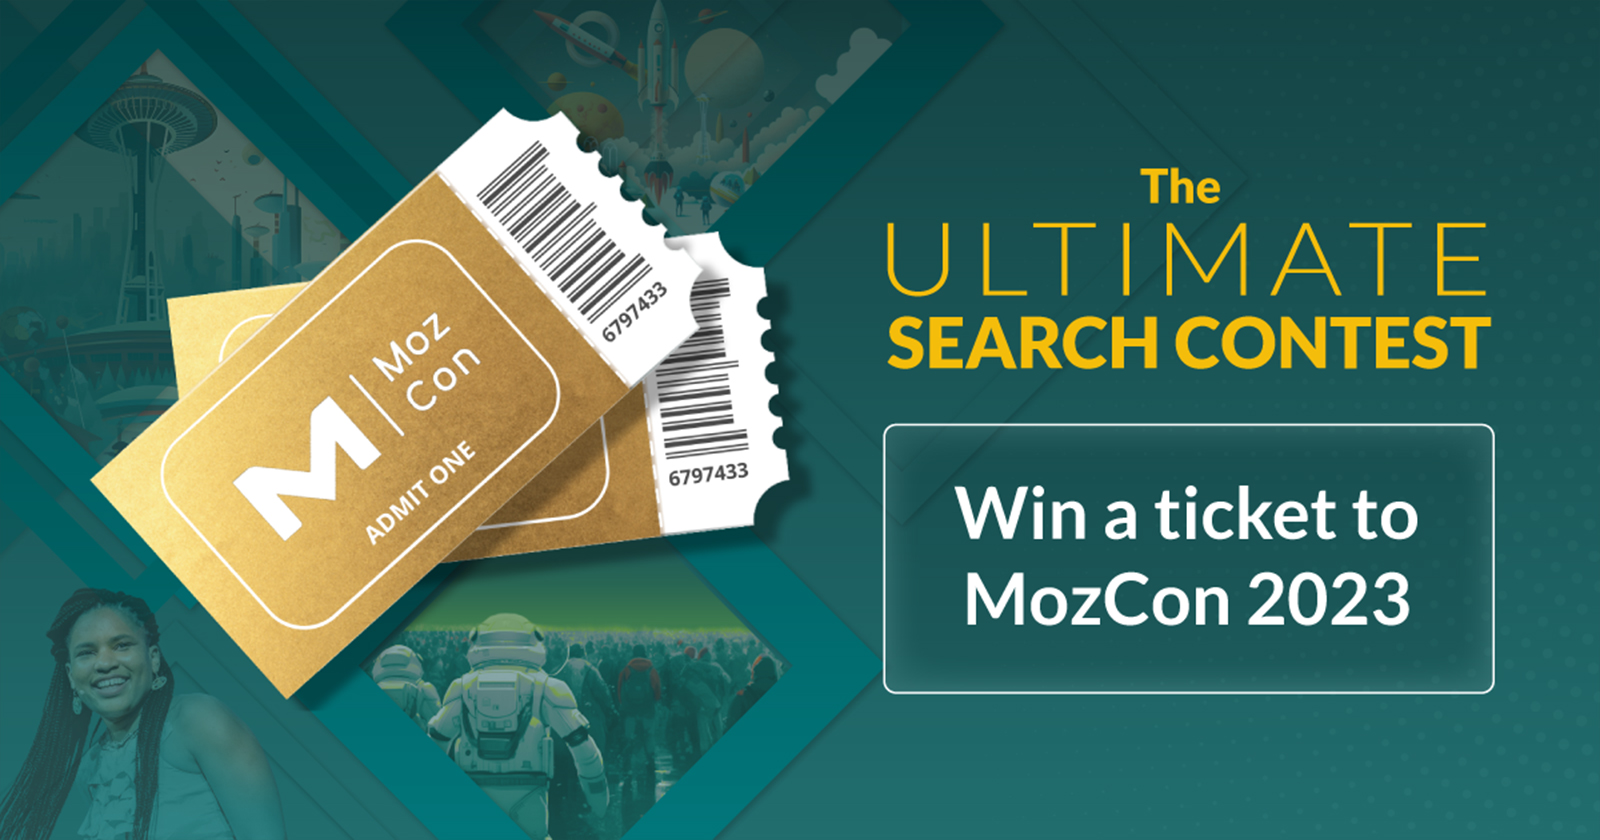 Are You Ready For The Ultimate Search Contest?